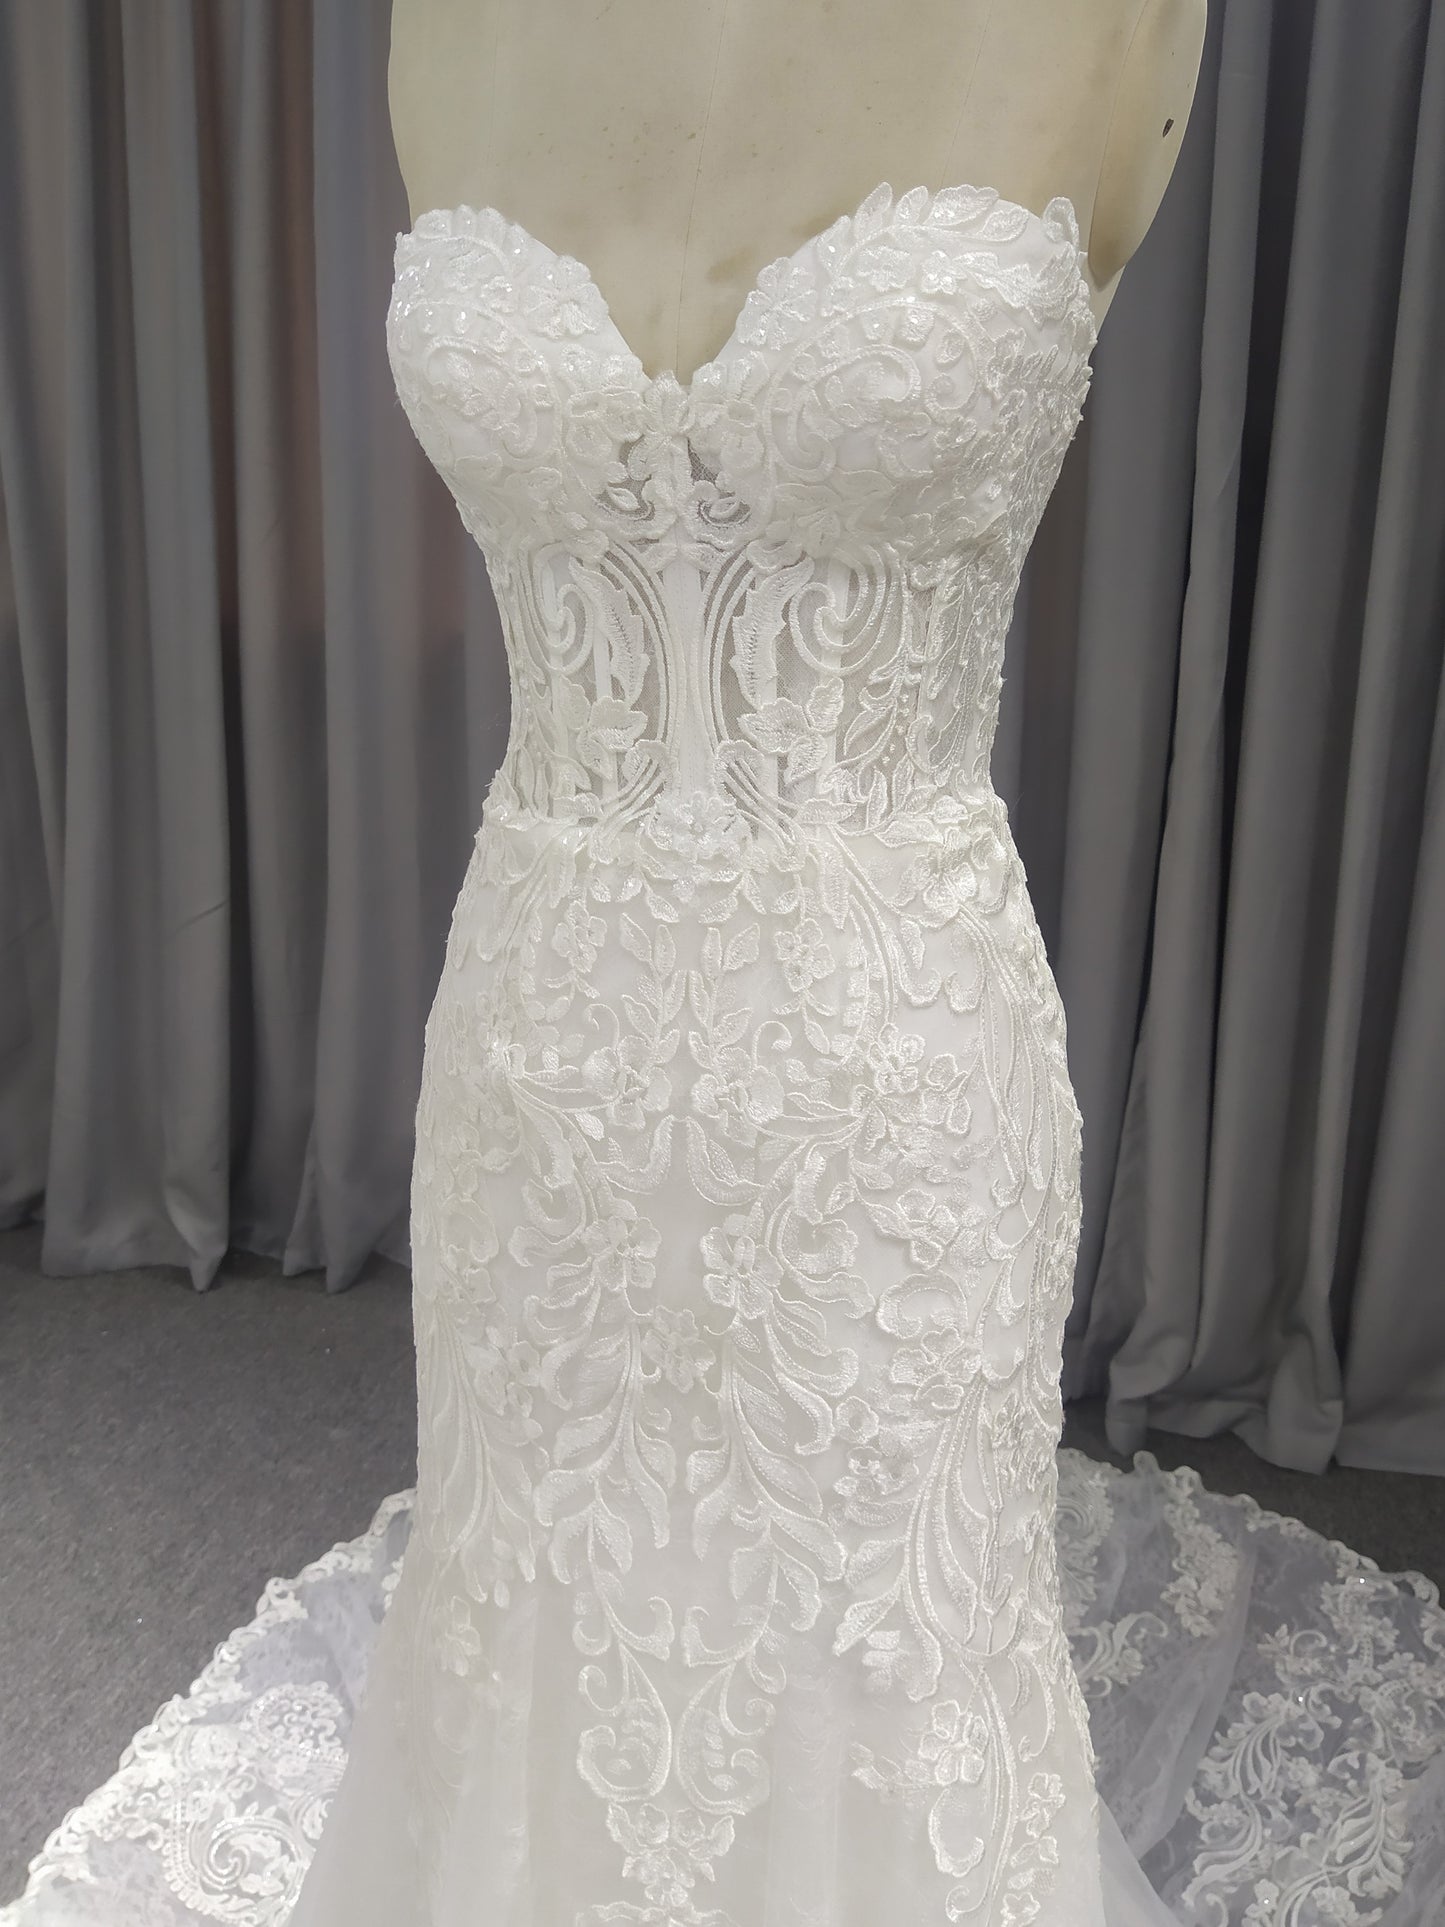 Mermaid Sweetheart Court Train Wedding Dresses With Lace